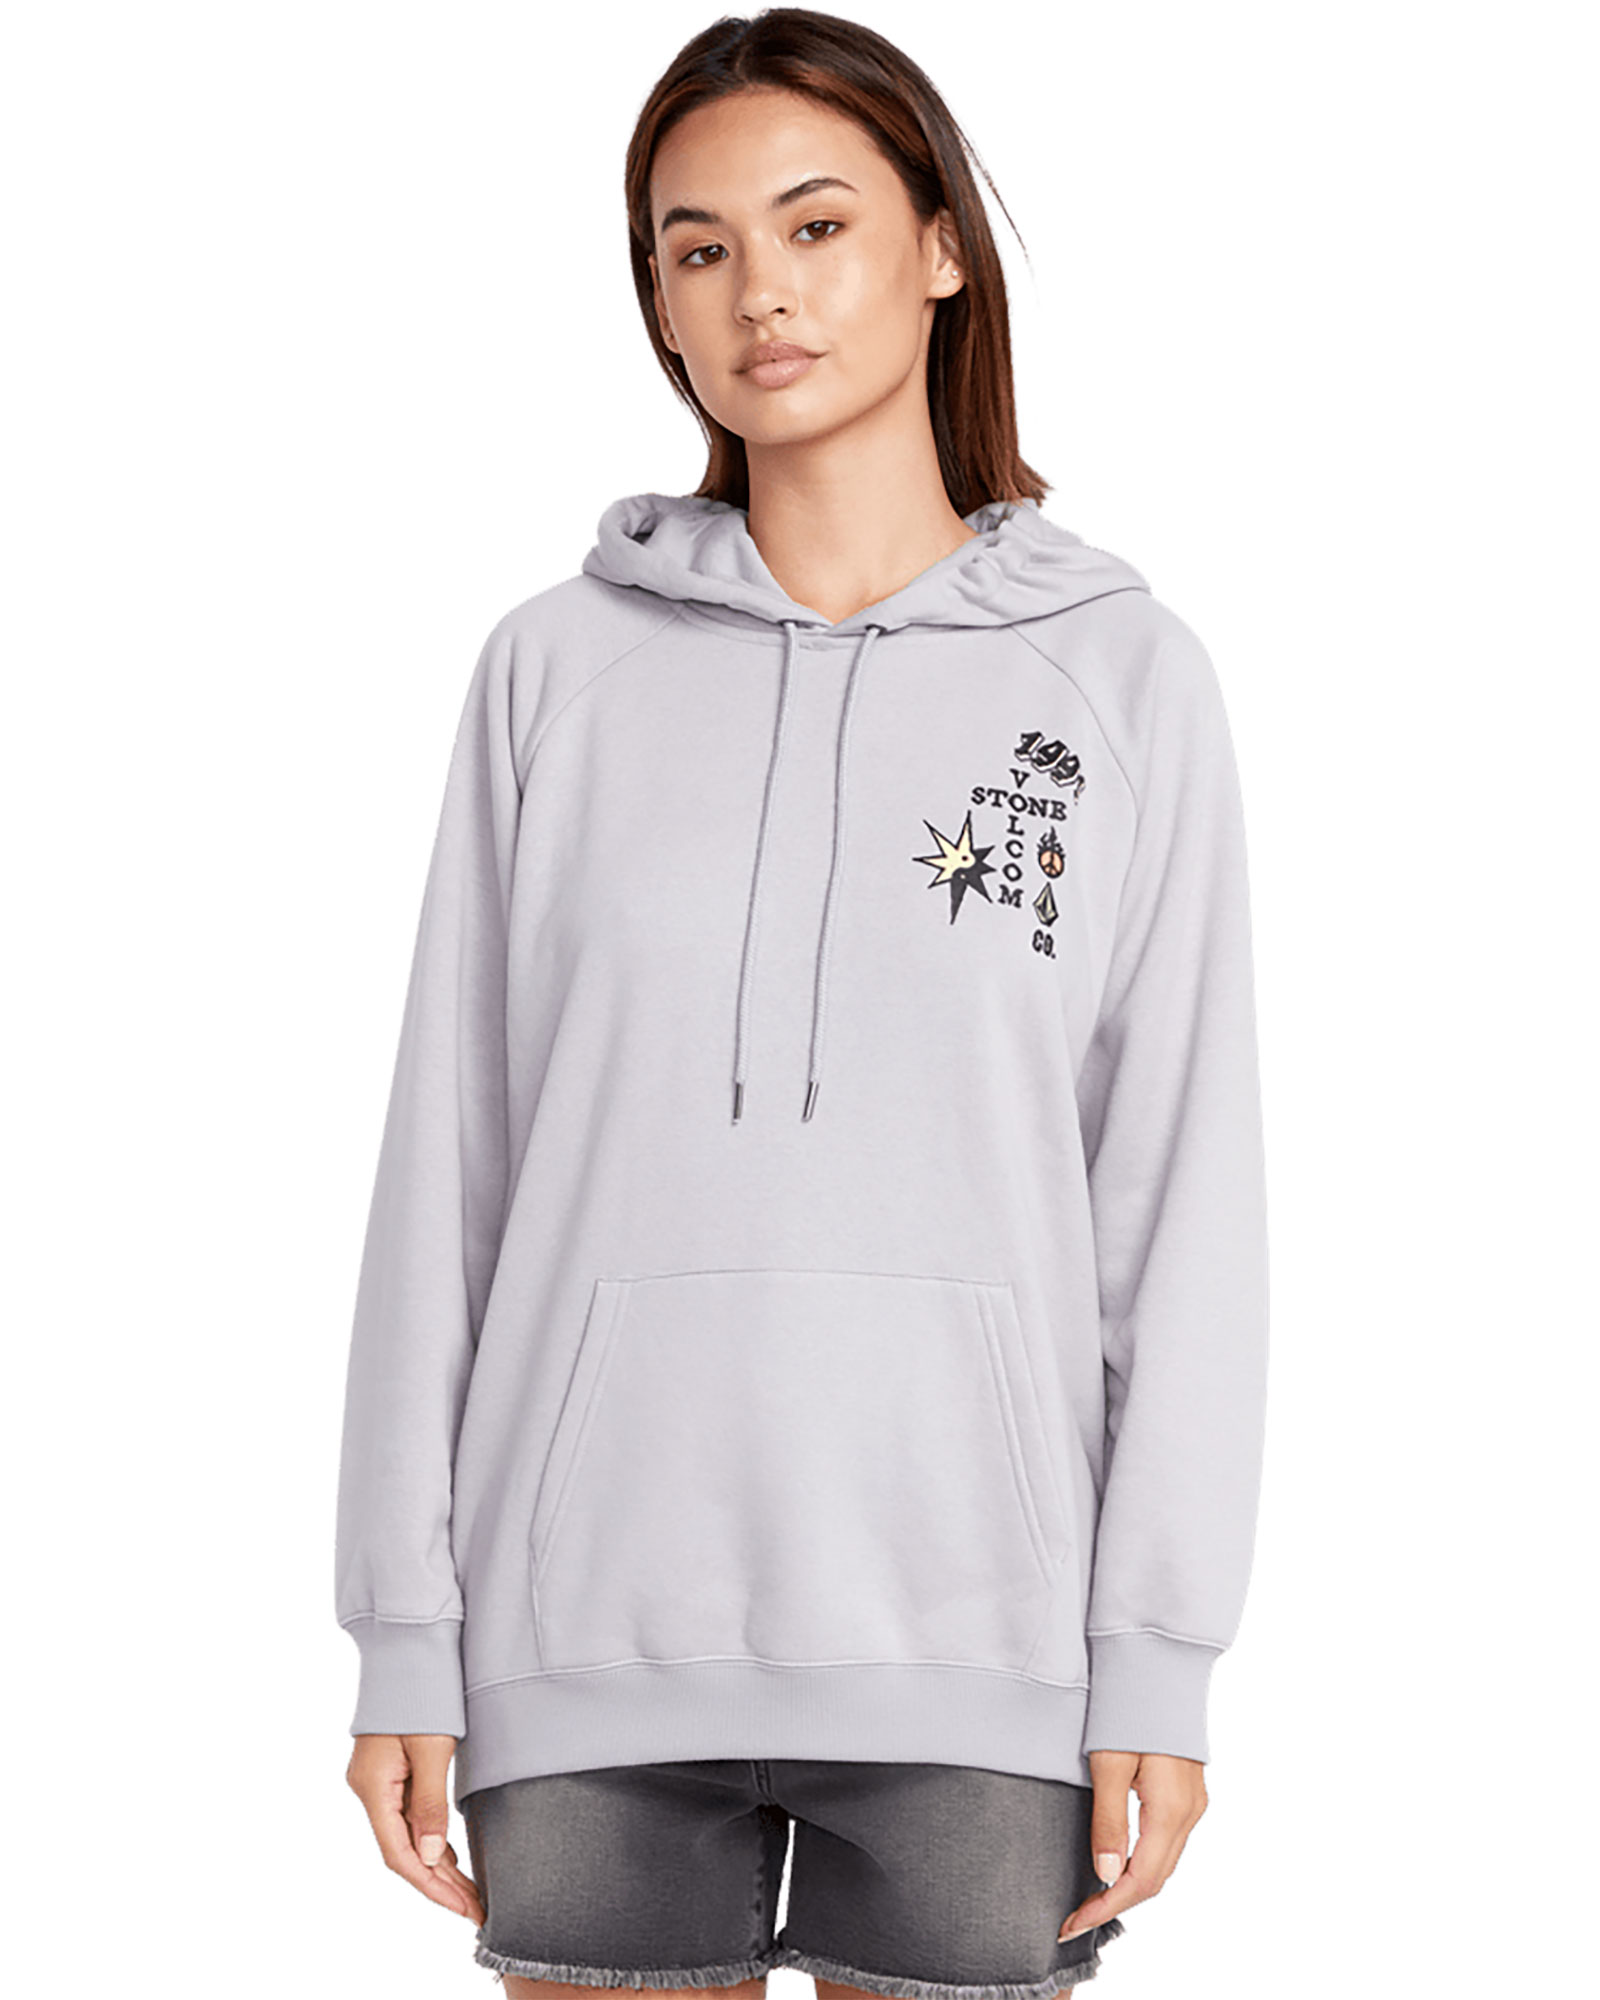 Volcom Women's Truly Stoked Bf Po Hoodie Review - Owner Reviews ...